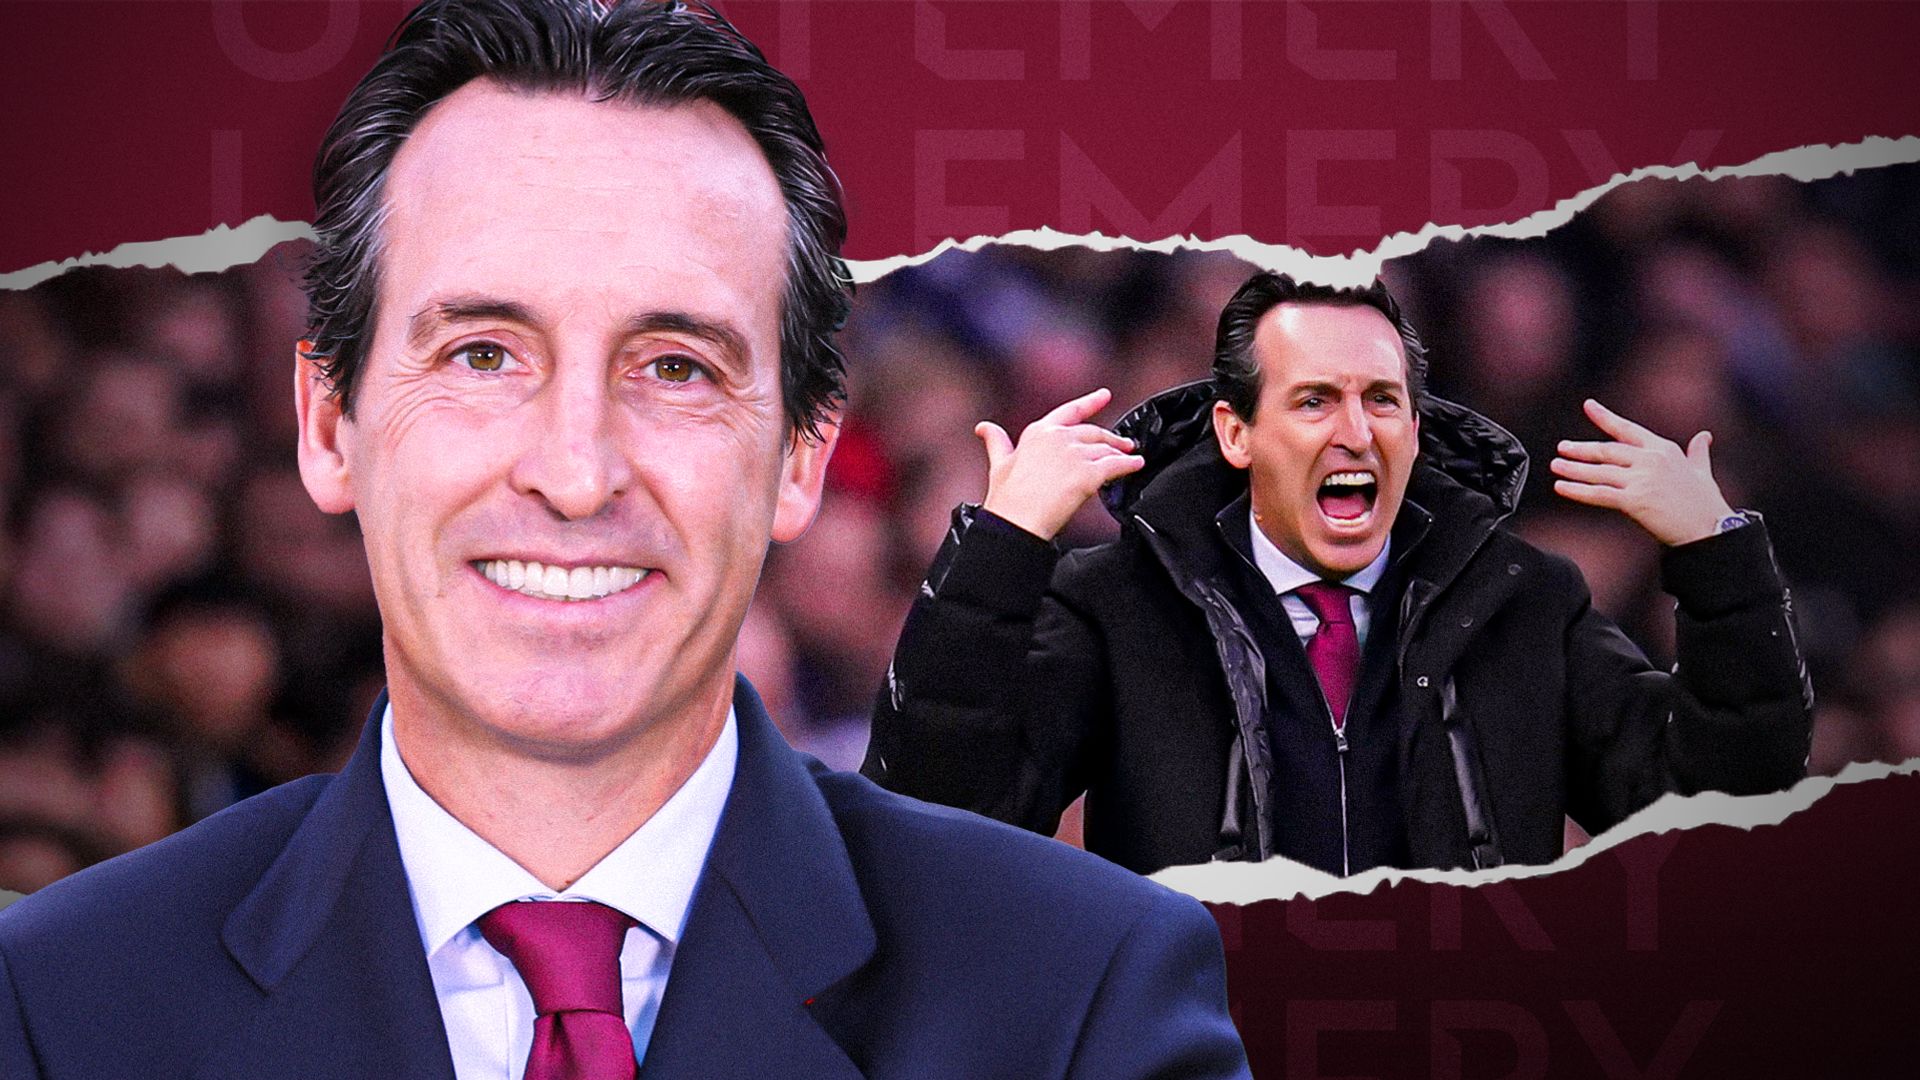 Emery explains why he is still aiming high at Villa